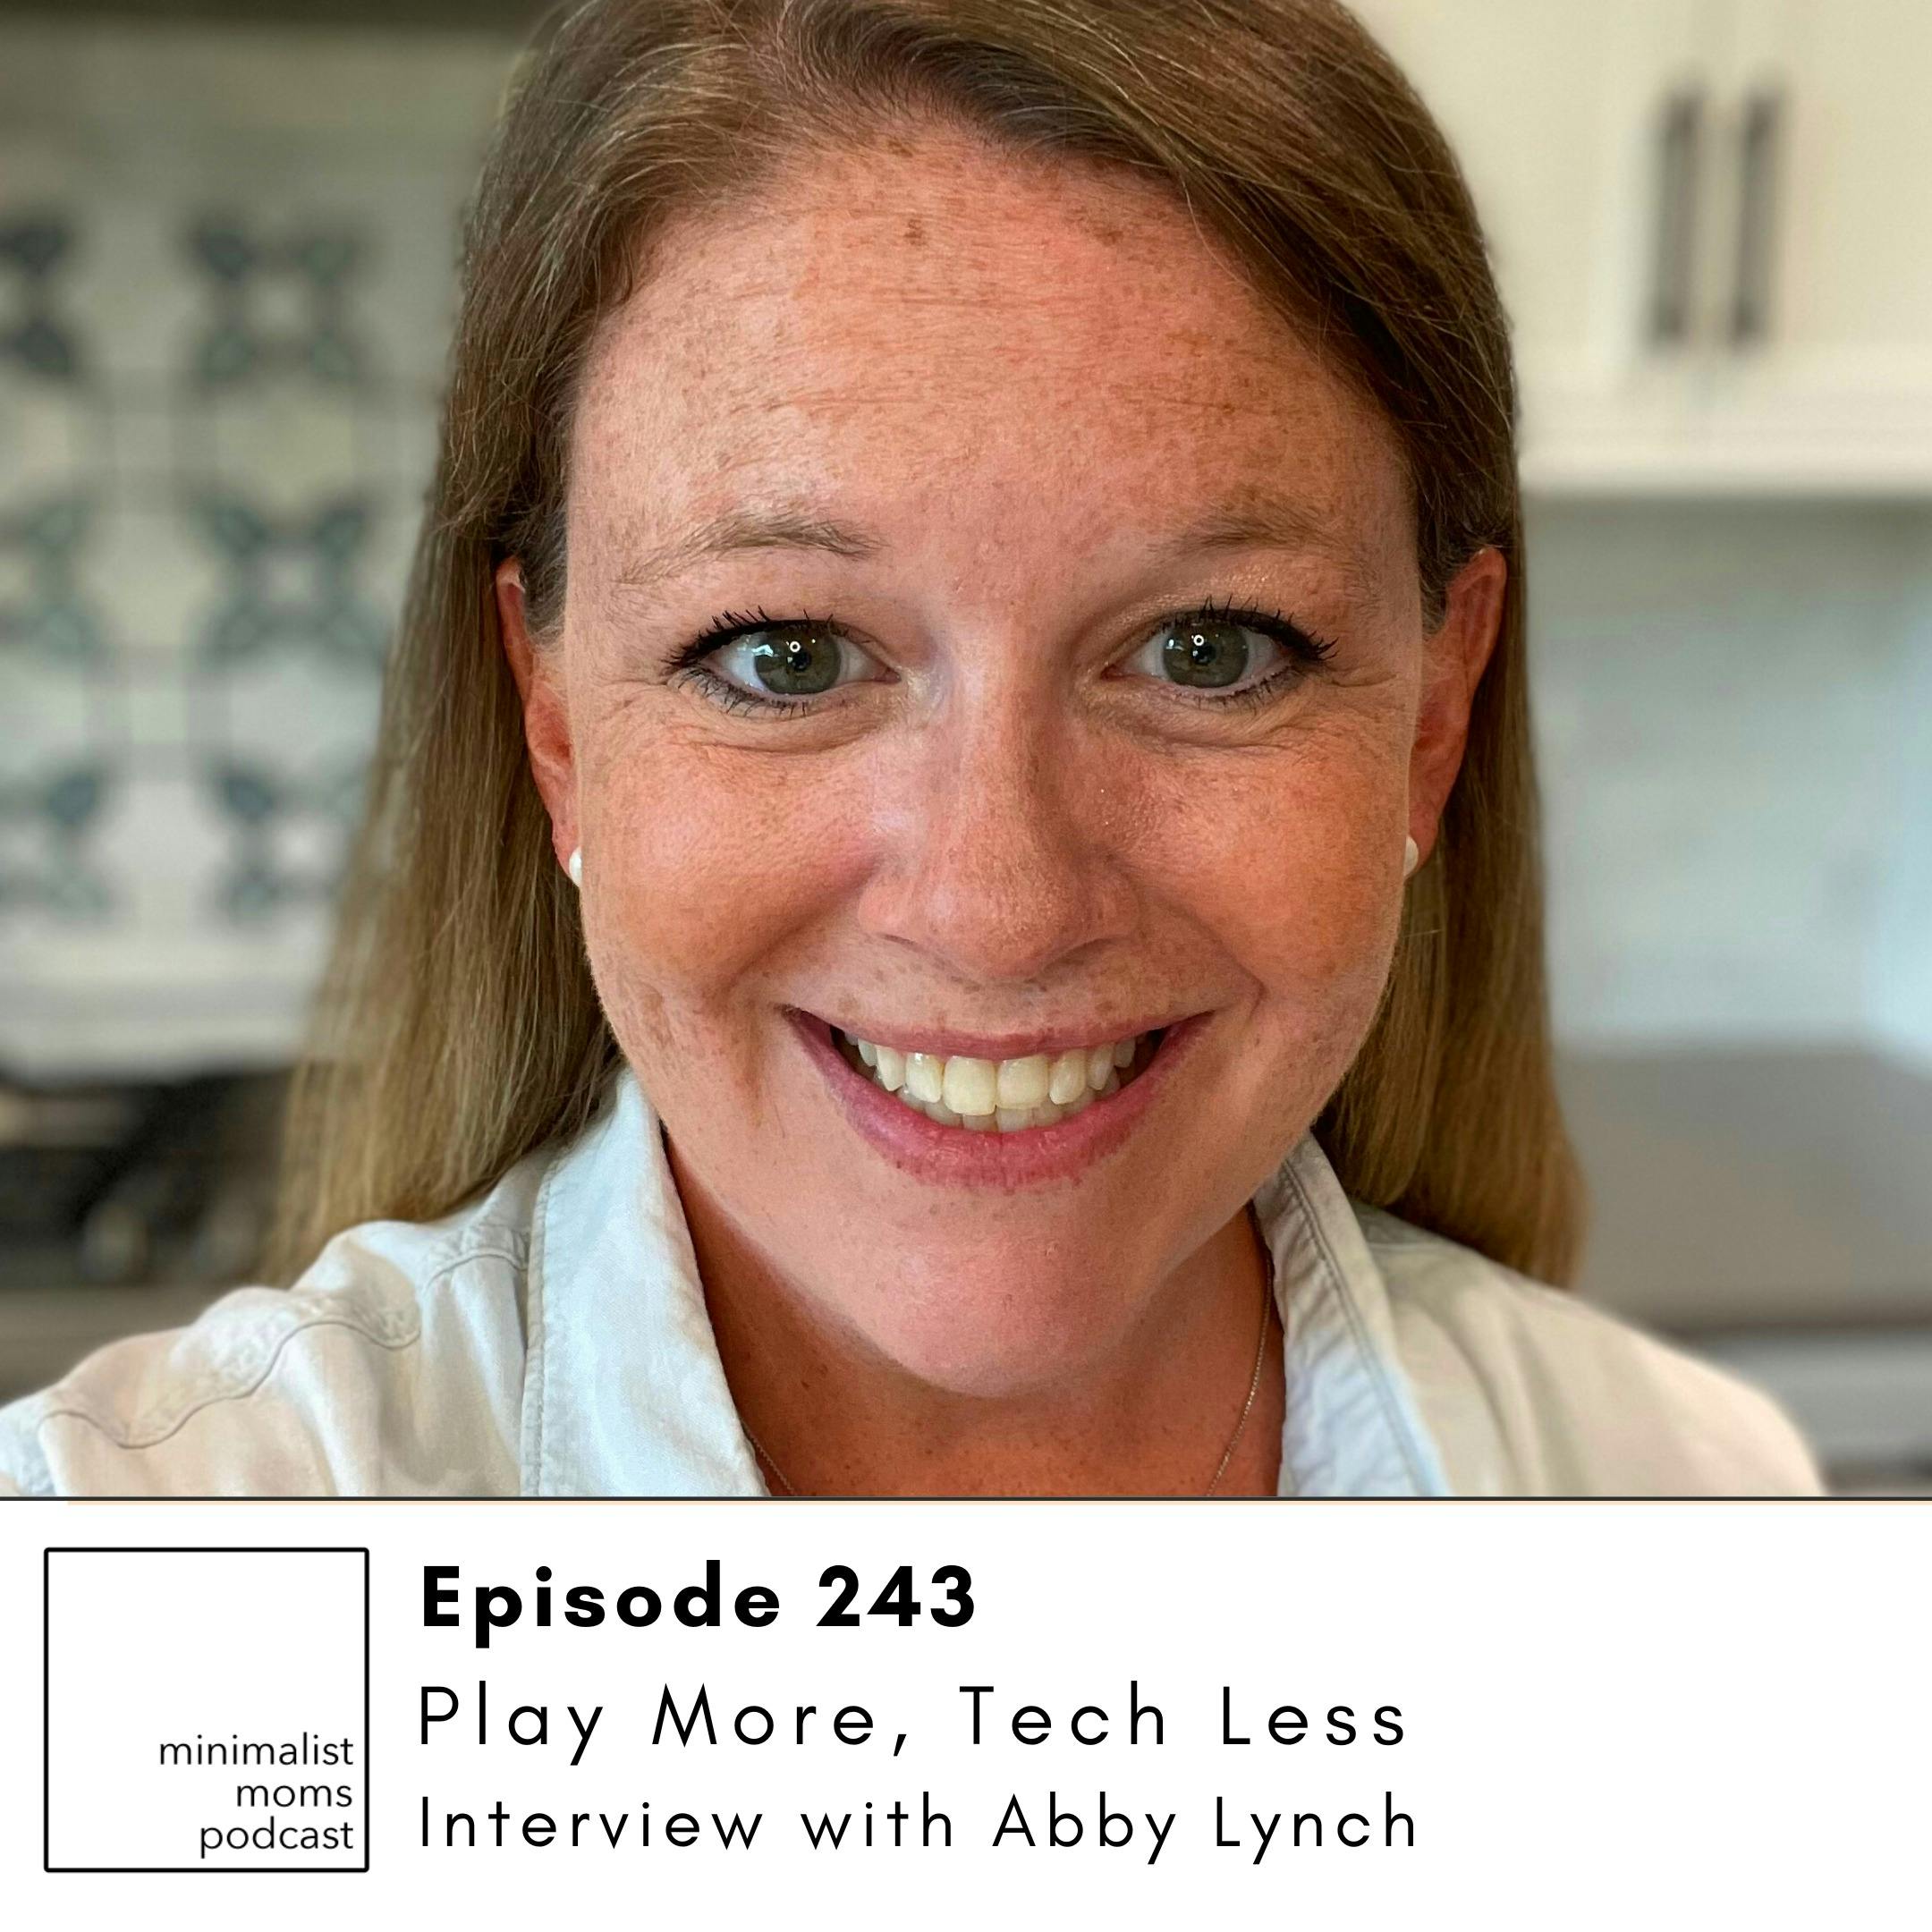 EP243: Play More, Tech Less with Abby Lynch